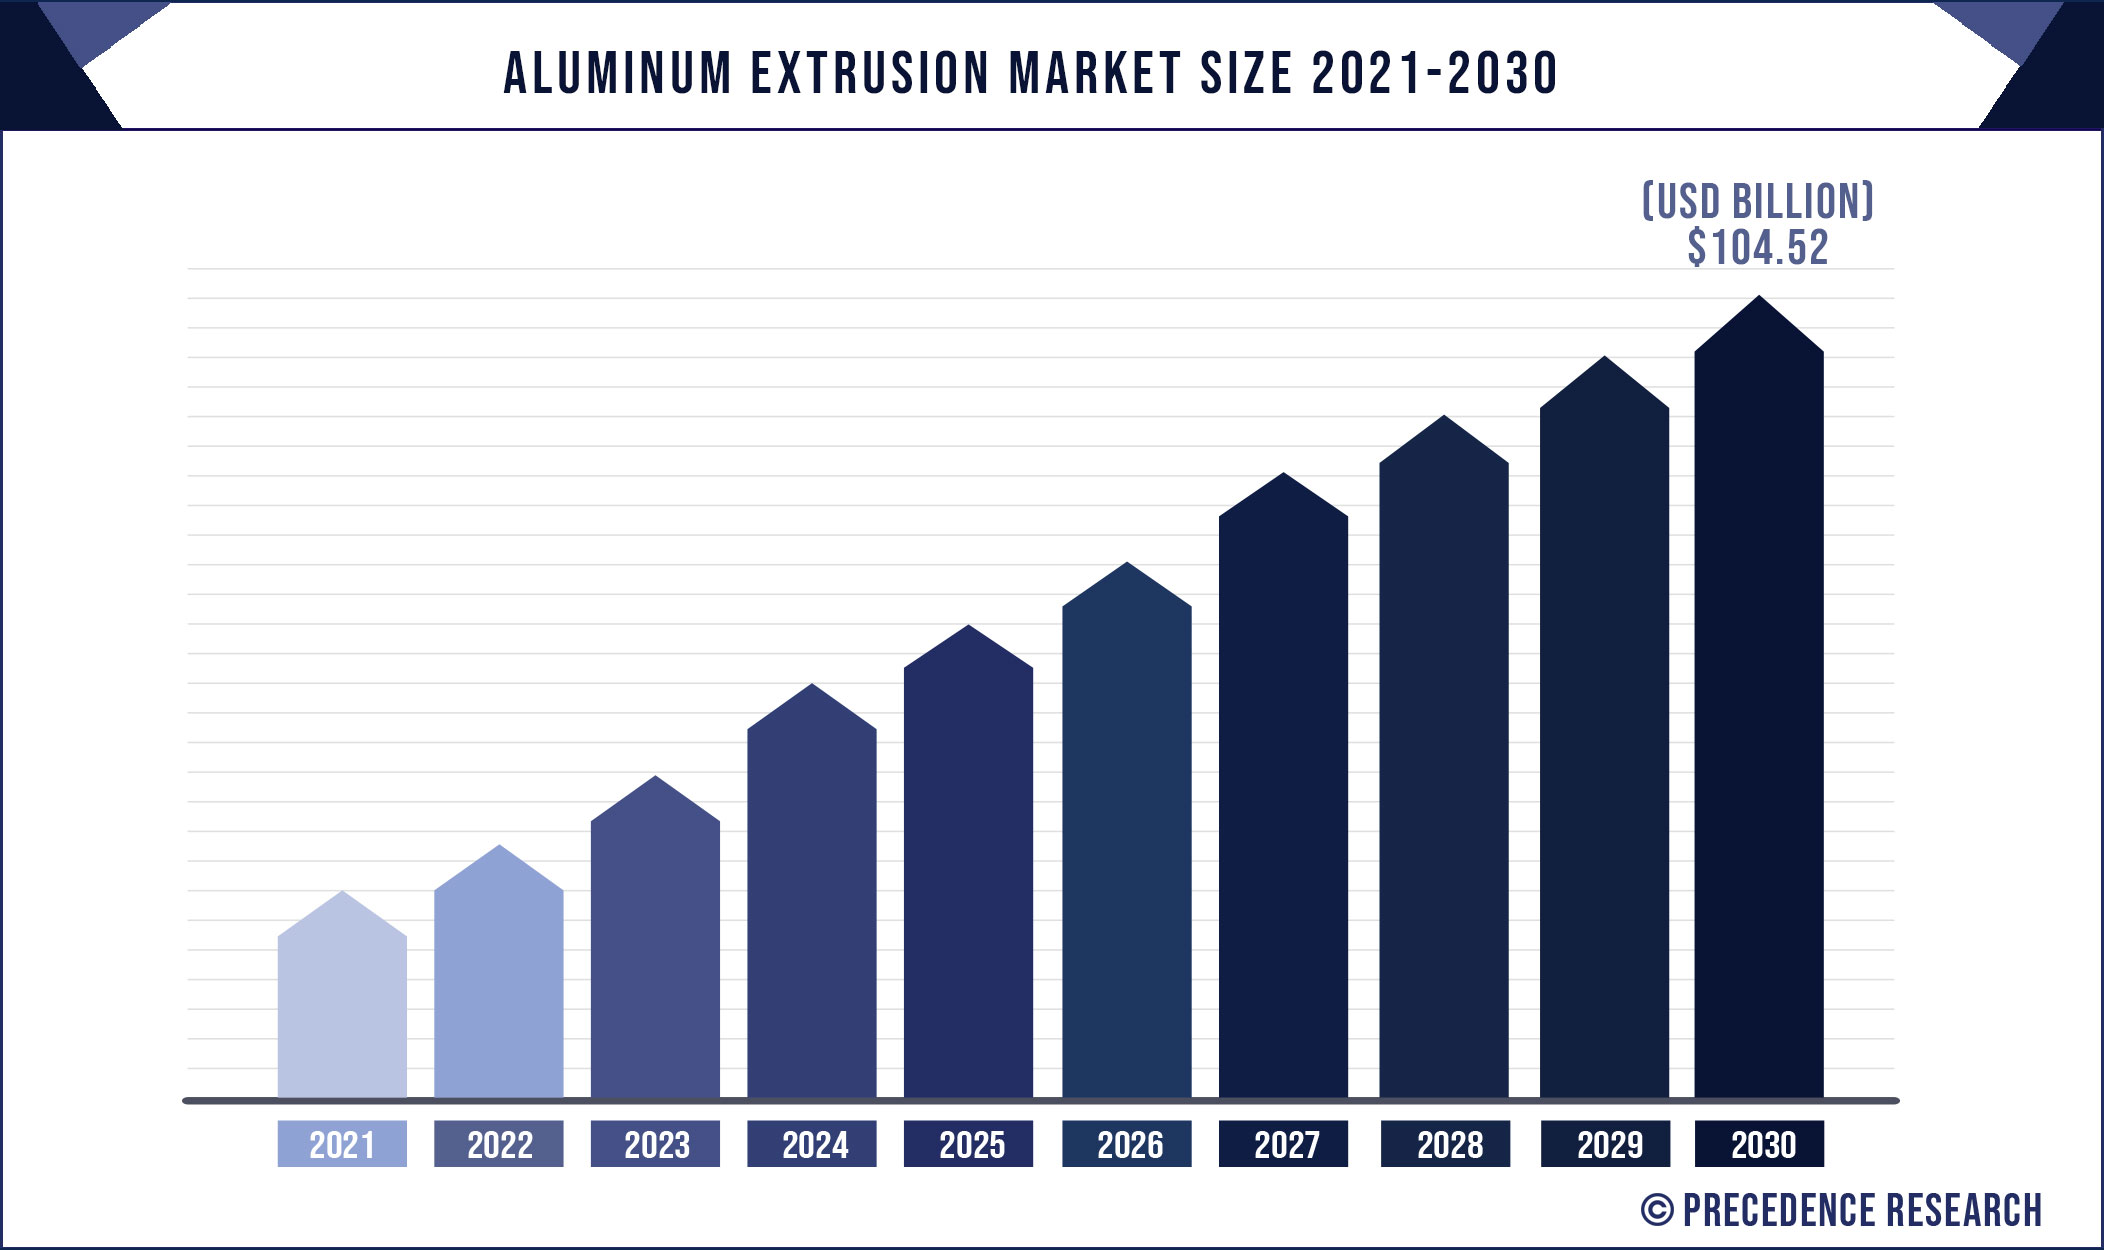 Aluminum Extrusion Market to Outstrip $126.85 Billion by 2030